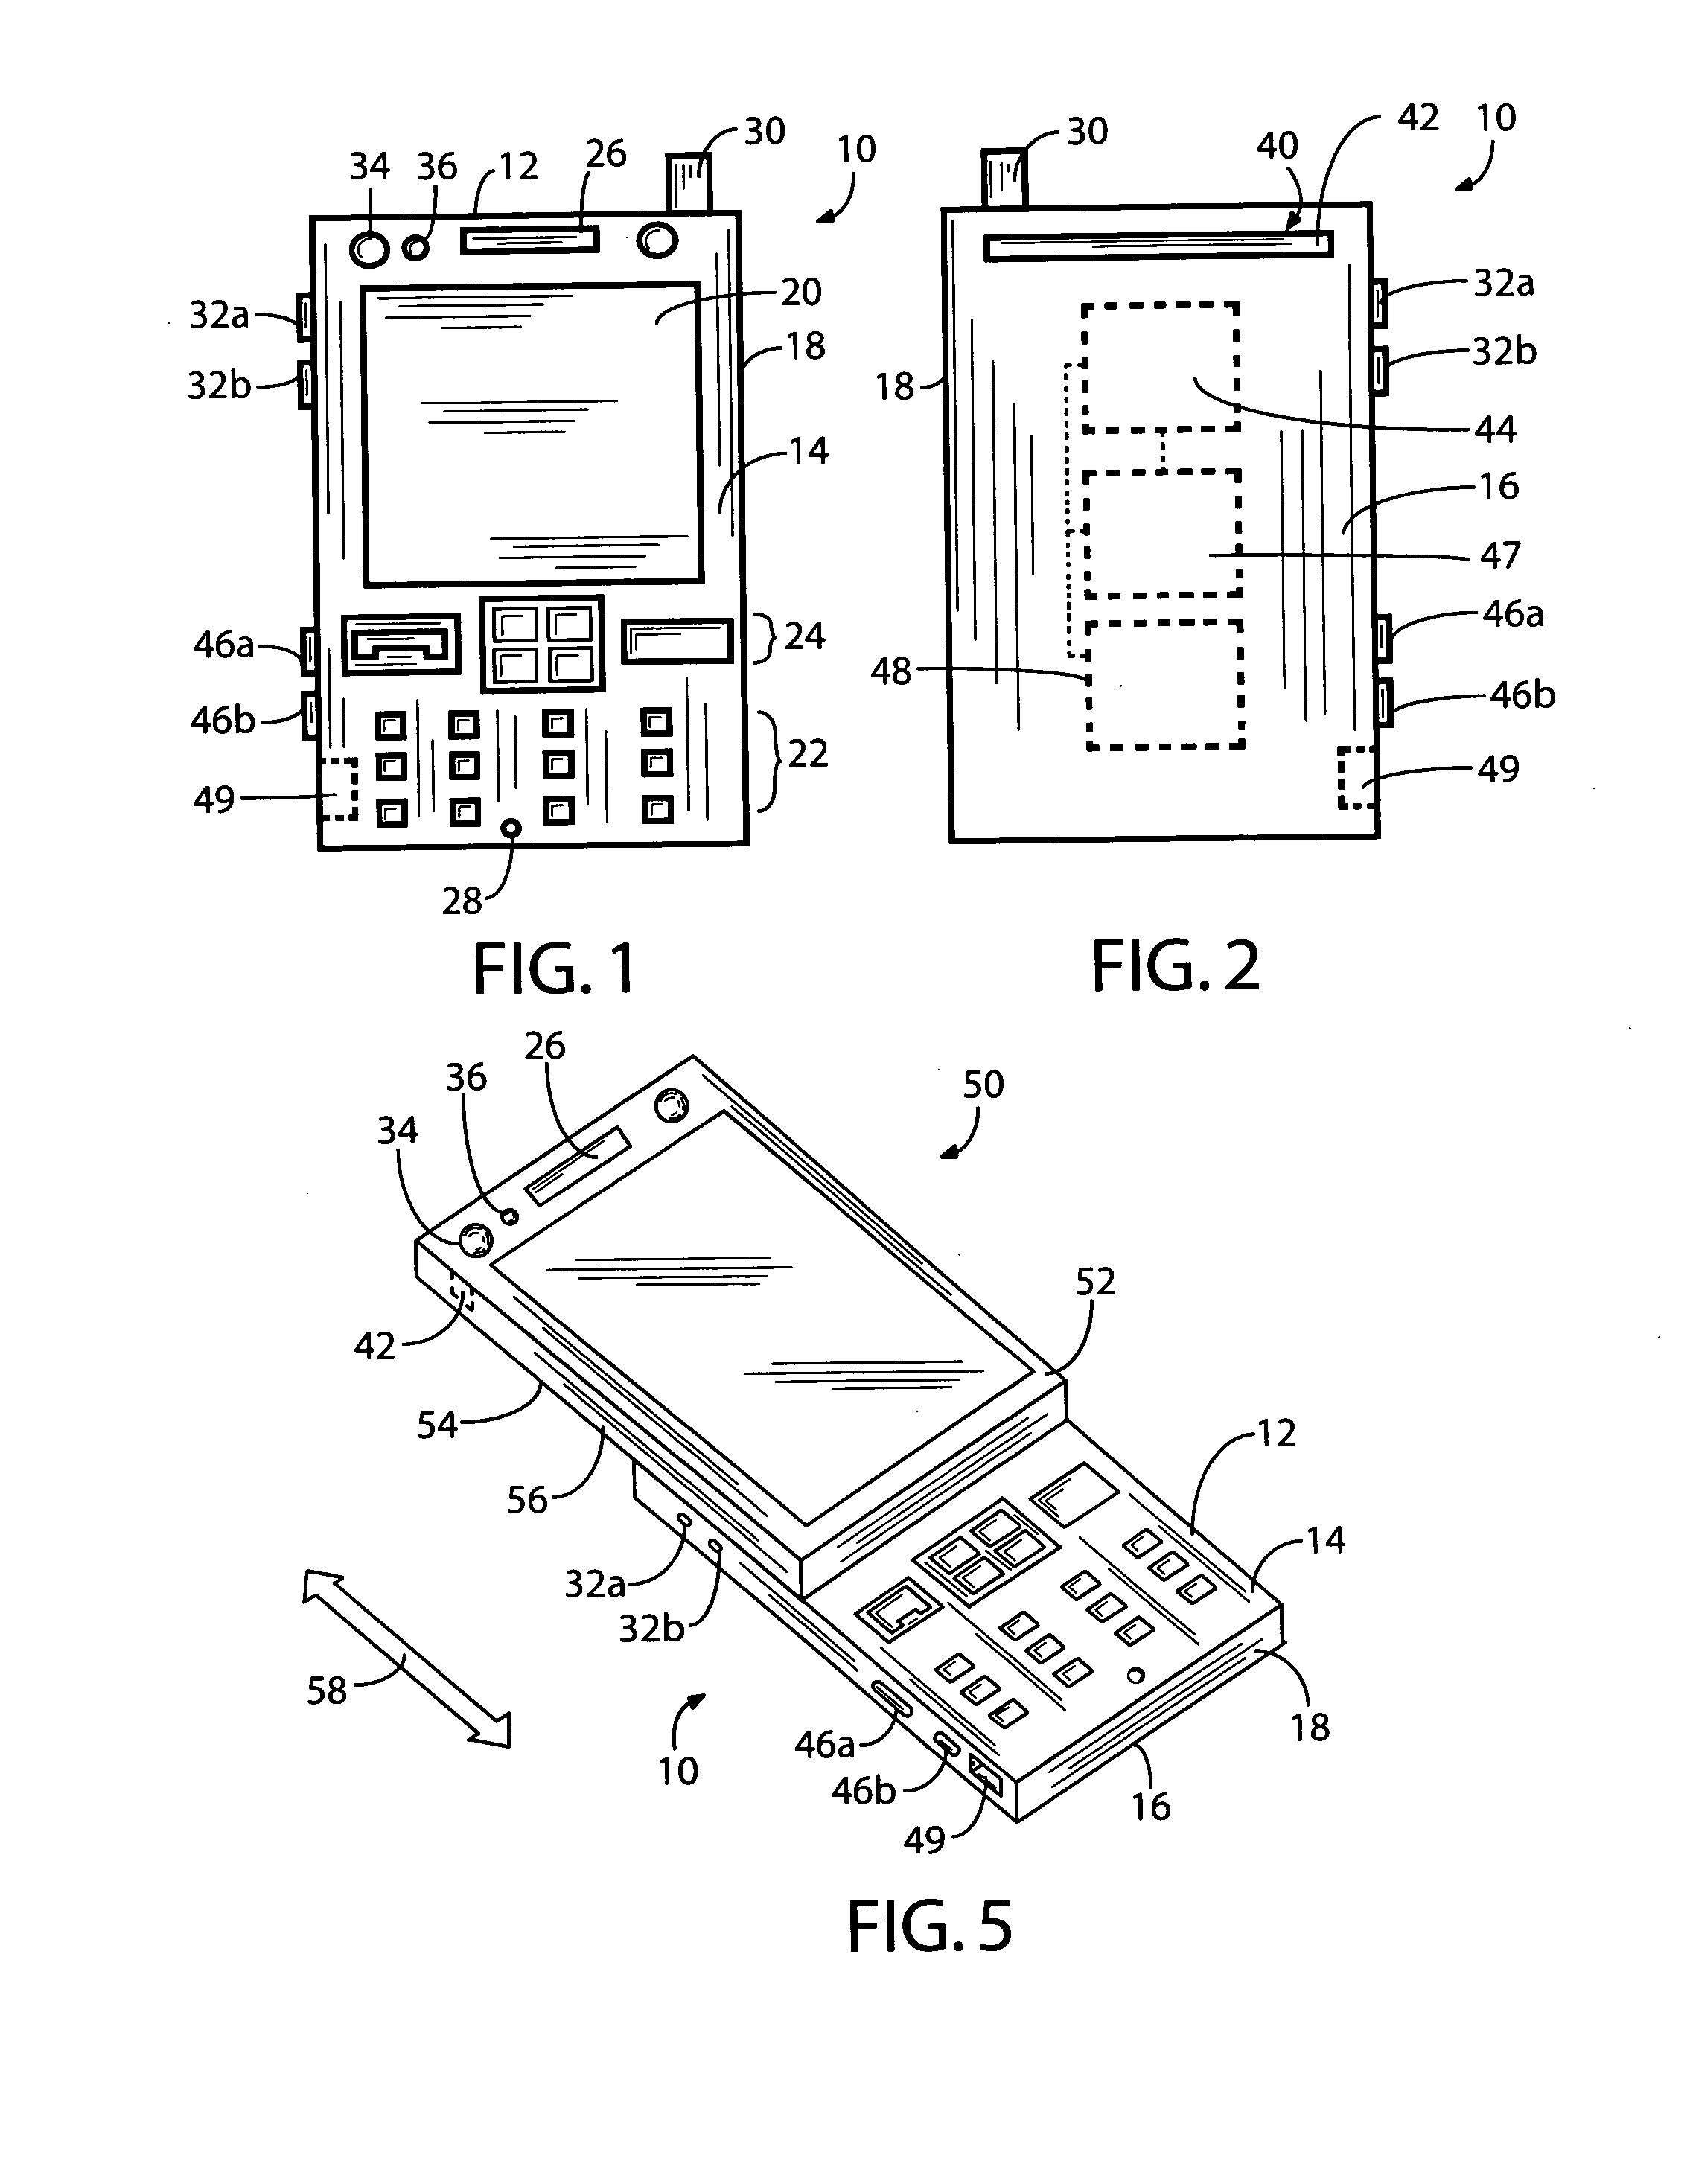 Hand held mobile communication device and method for managing printed documents